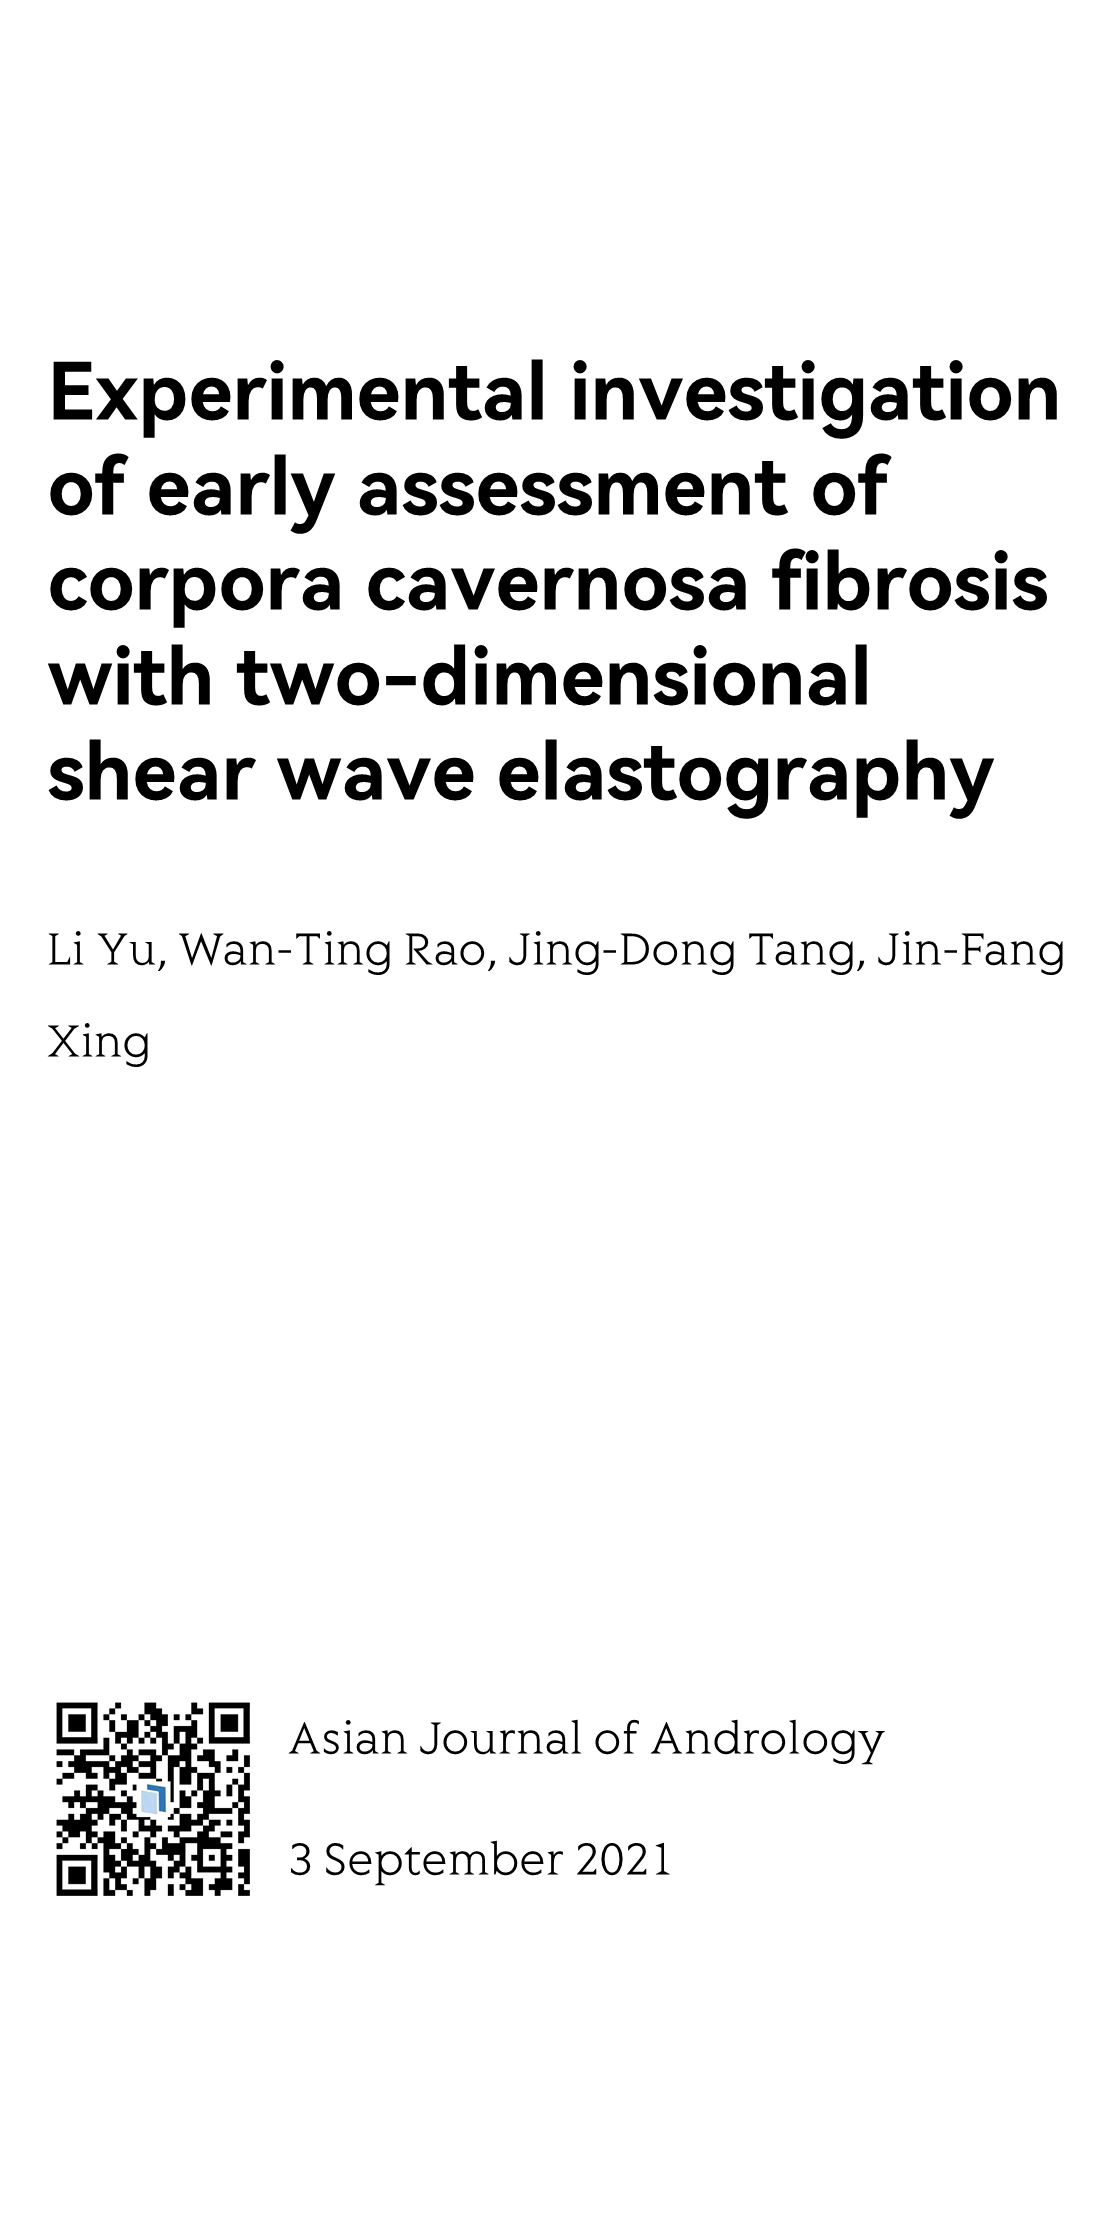 Experimental investigation of early assessment of corpora cavernosa fibrosis with two-dimensional shear wave elastography_1